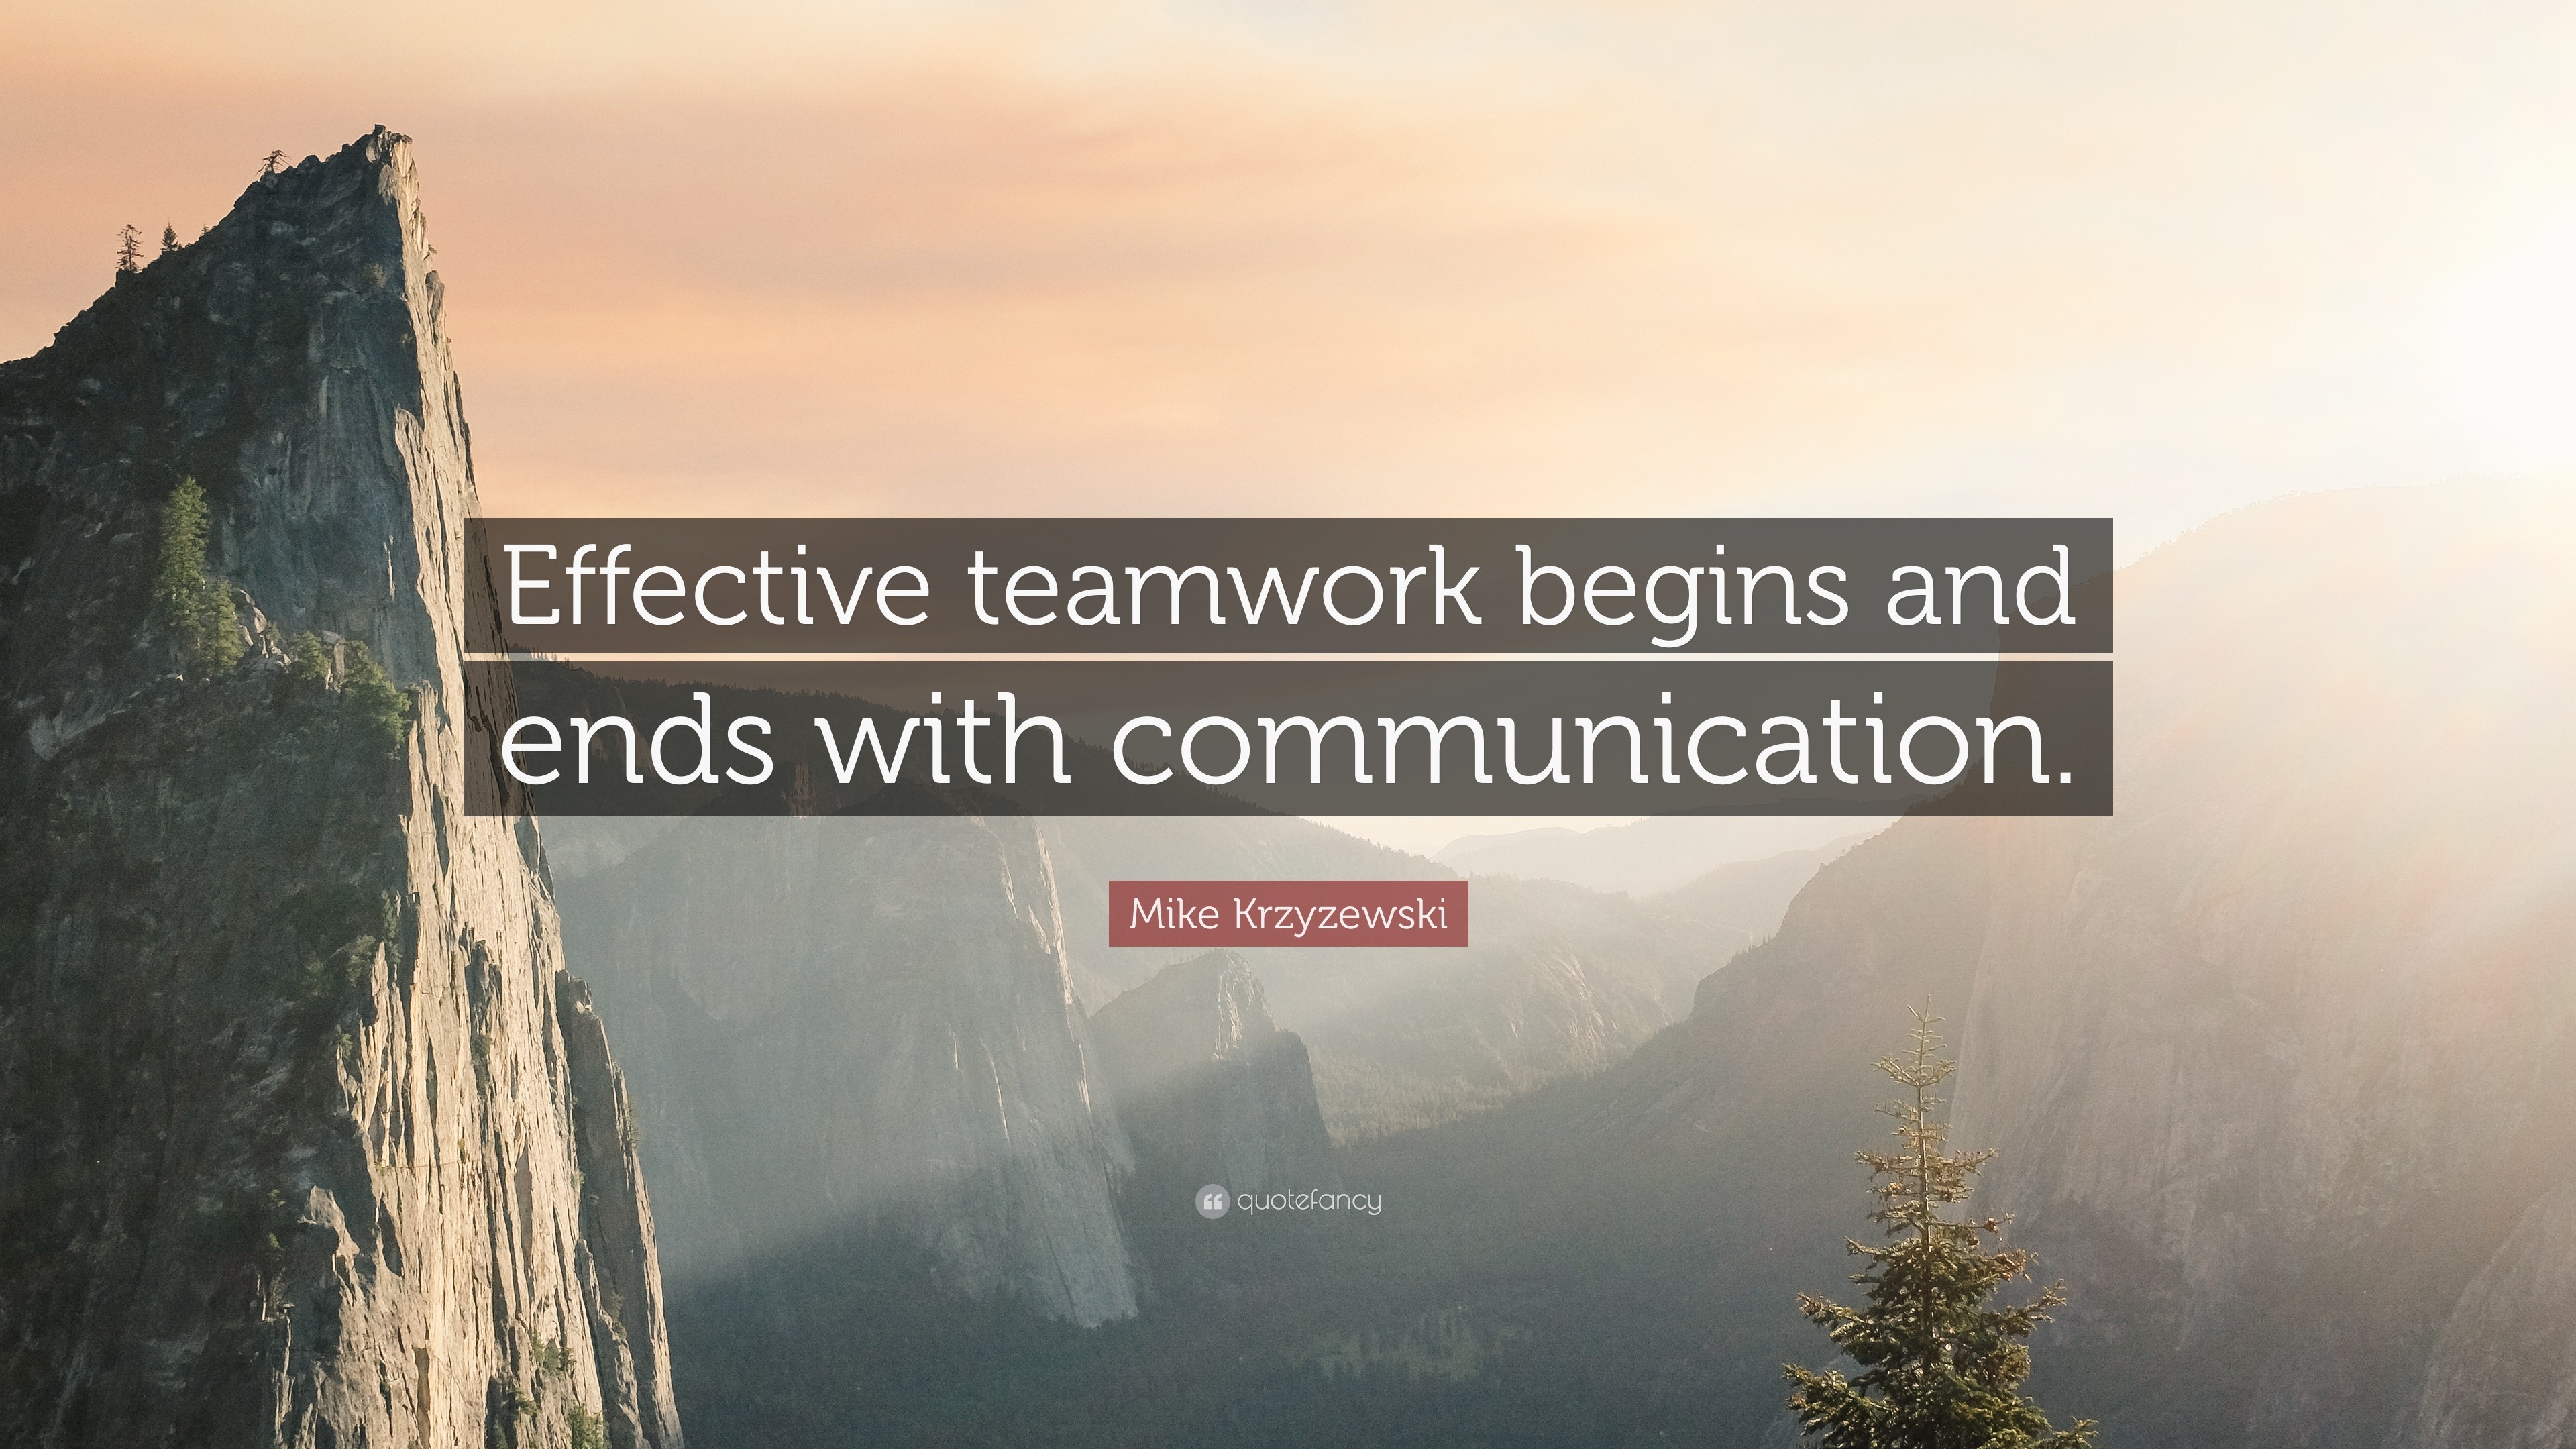 Quotes about communication in the workplace